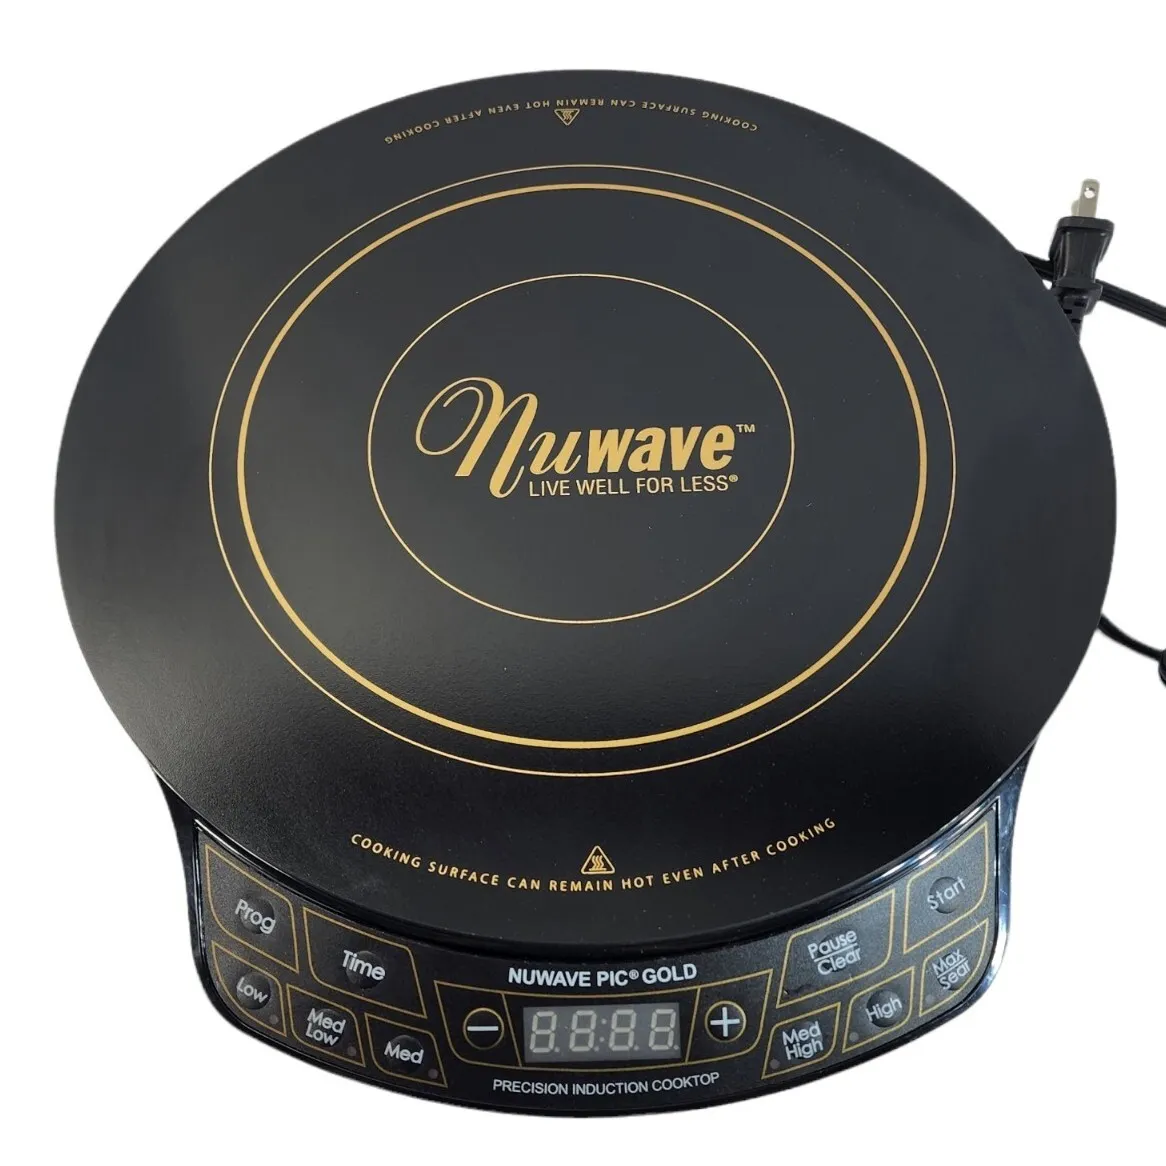 Nuwave Portable Induction Cooktop